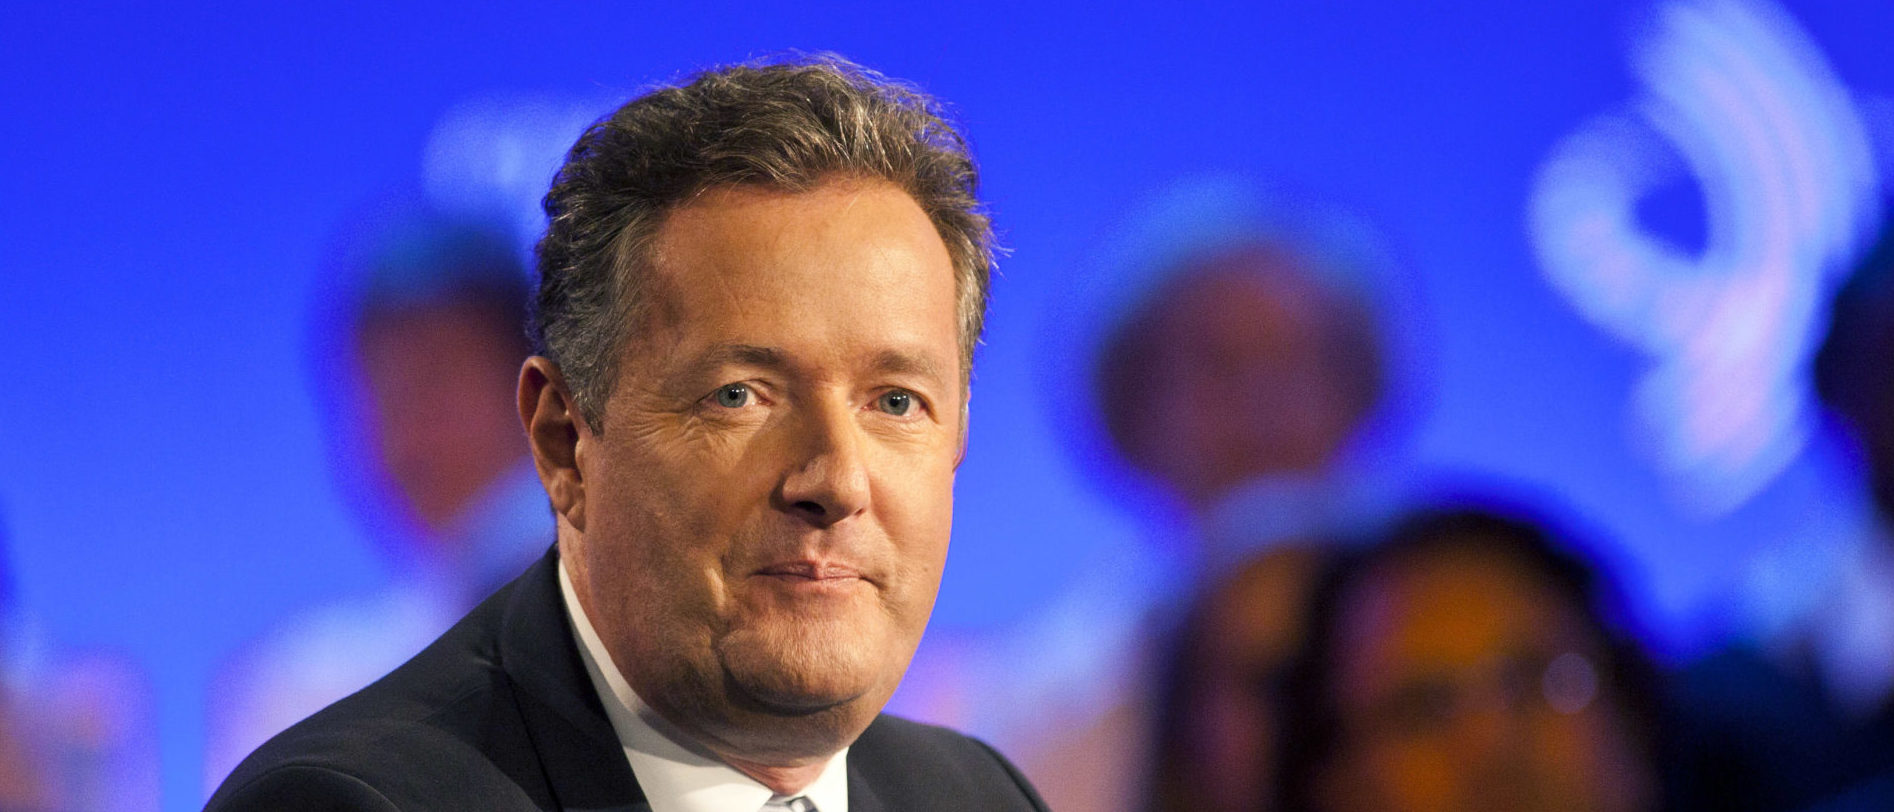 NEW YORK - SEPTEMBER 25: Piers Morgan, speaks during a taping of CNN's Piers Morgan Tonight at the annual Clinton Global Initiative (CGI) meeting on September 25, 2013 in New York City. Timed to coincide with the United Nations General Assembly, CGI brings together heads of state, CEOs, philanthropists and others to help find solutions to the world's major problems. (Photo by Ramin Talaie/Getty Images)